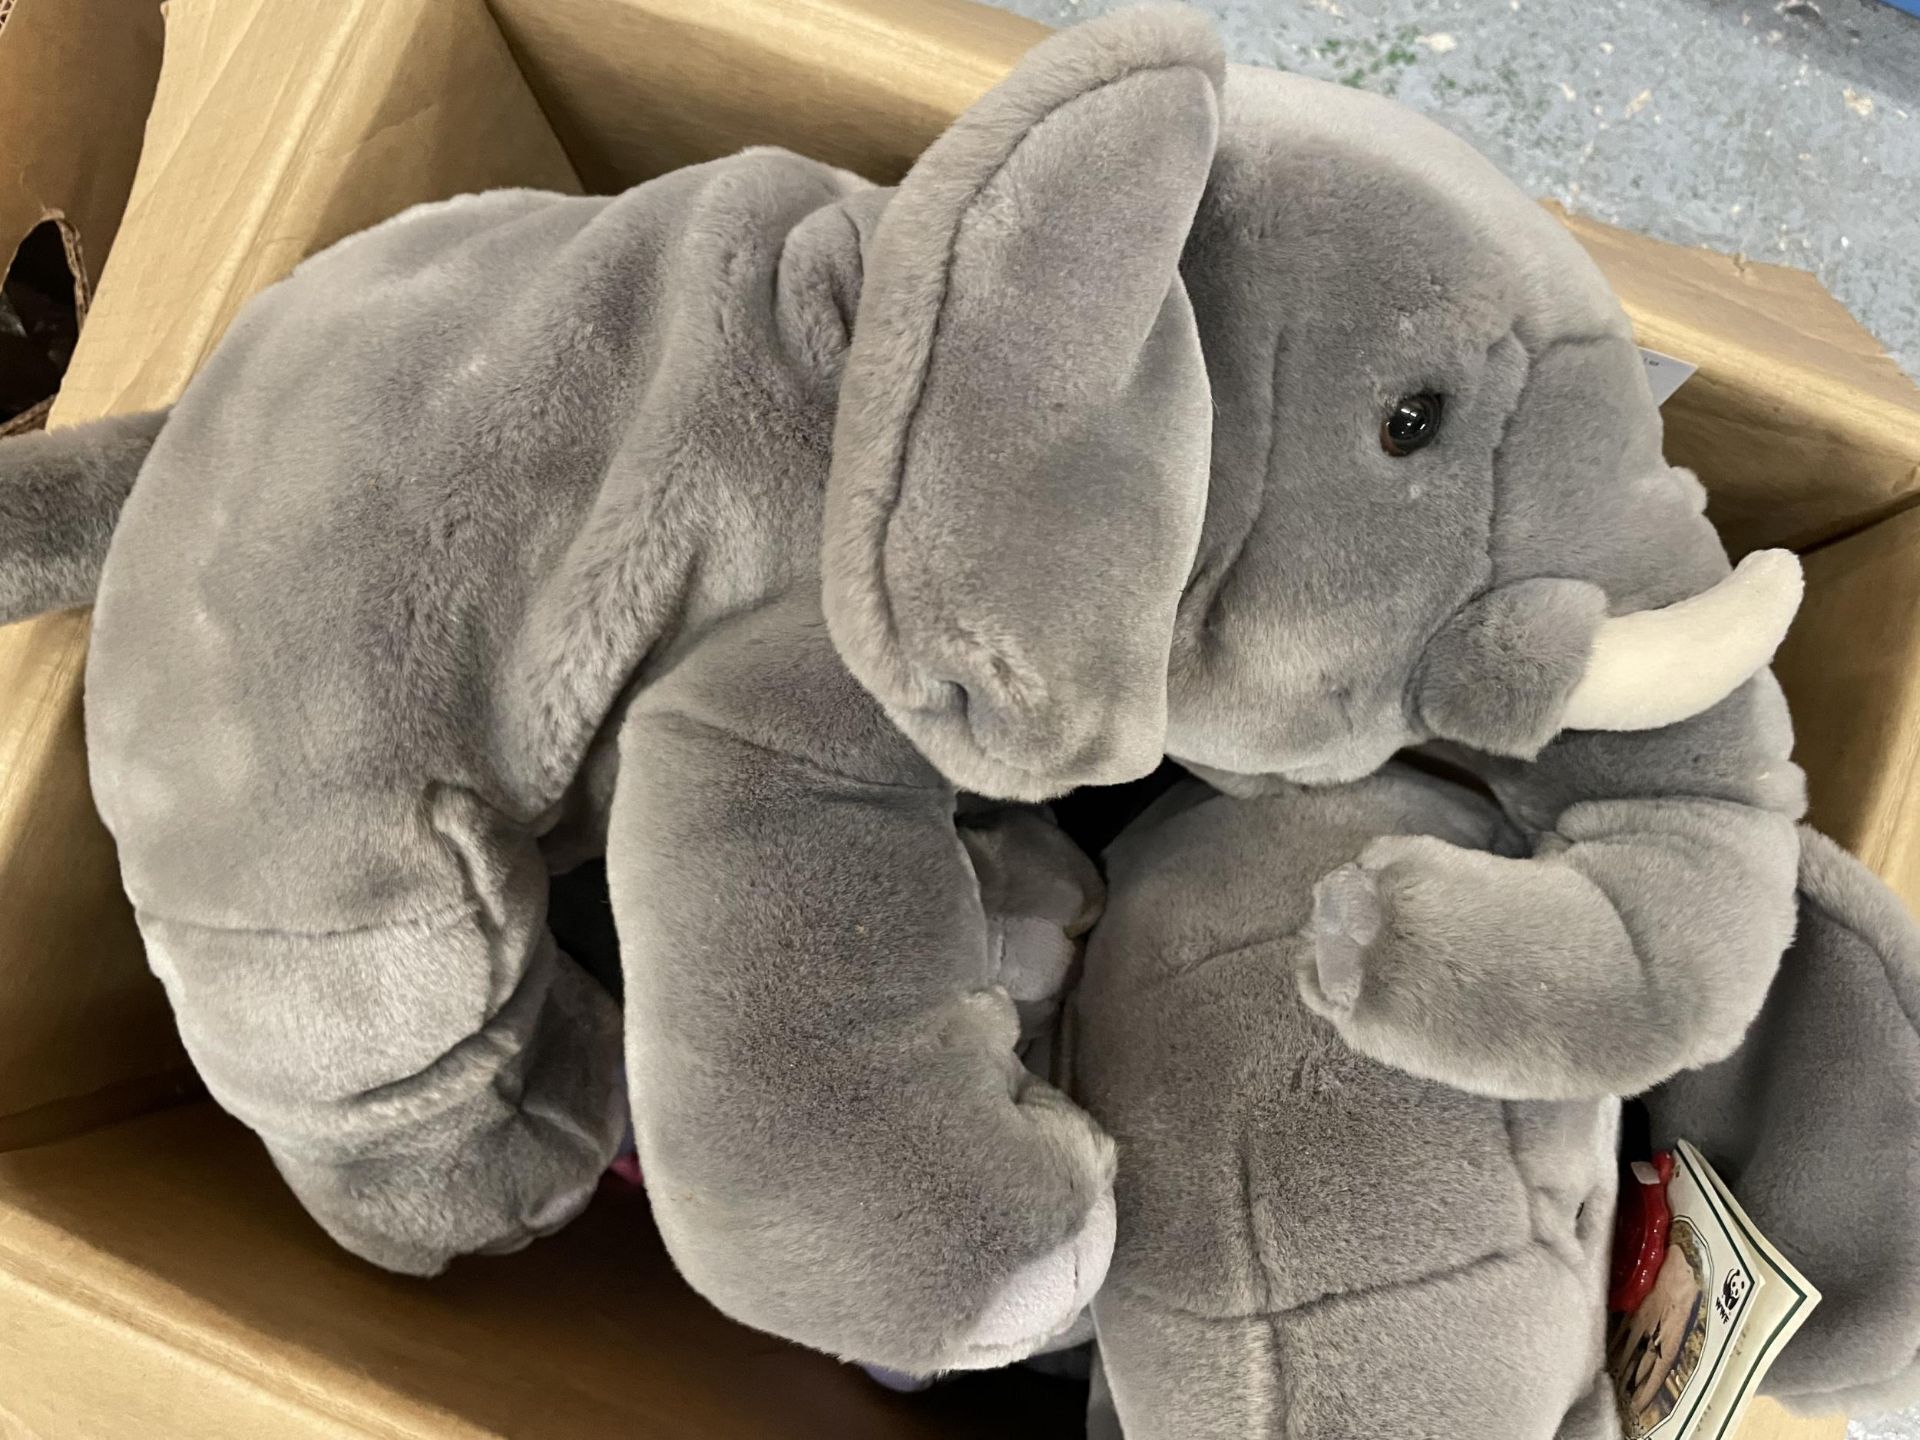 FIVE ASSORTED CUDDLY TOYS TO INCLUDE TWO LARGE ELEPHANTS SOME WITH TAGS - Image 2 of 5